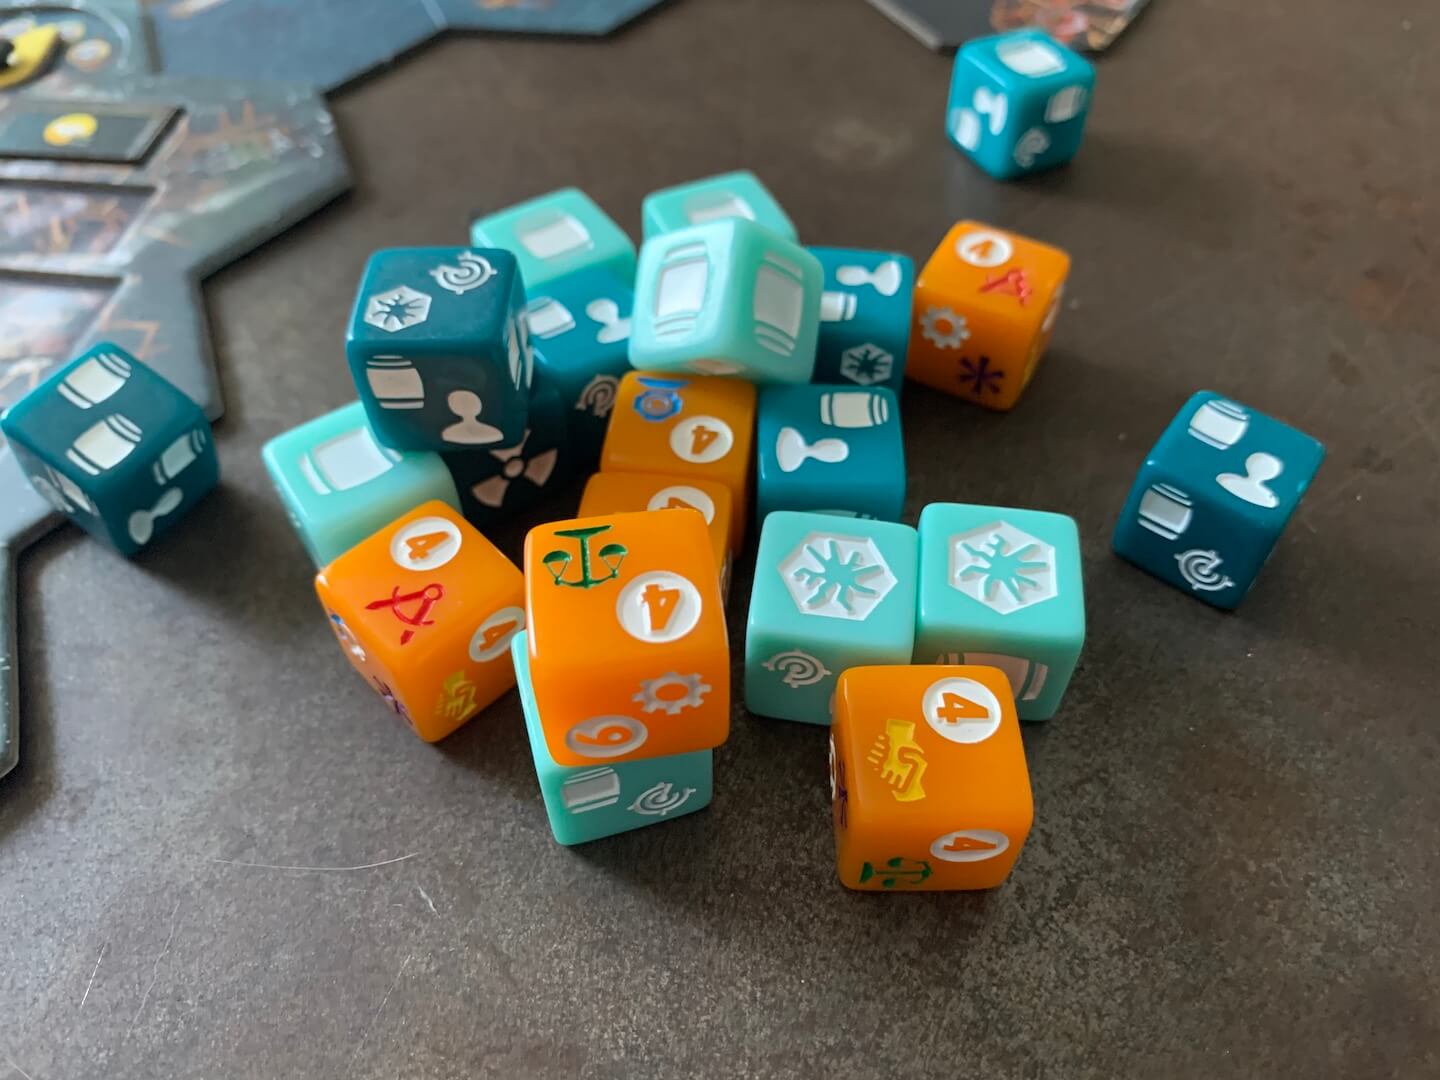 The colorful dice of Flotilla